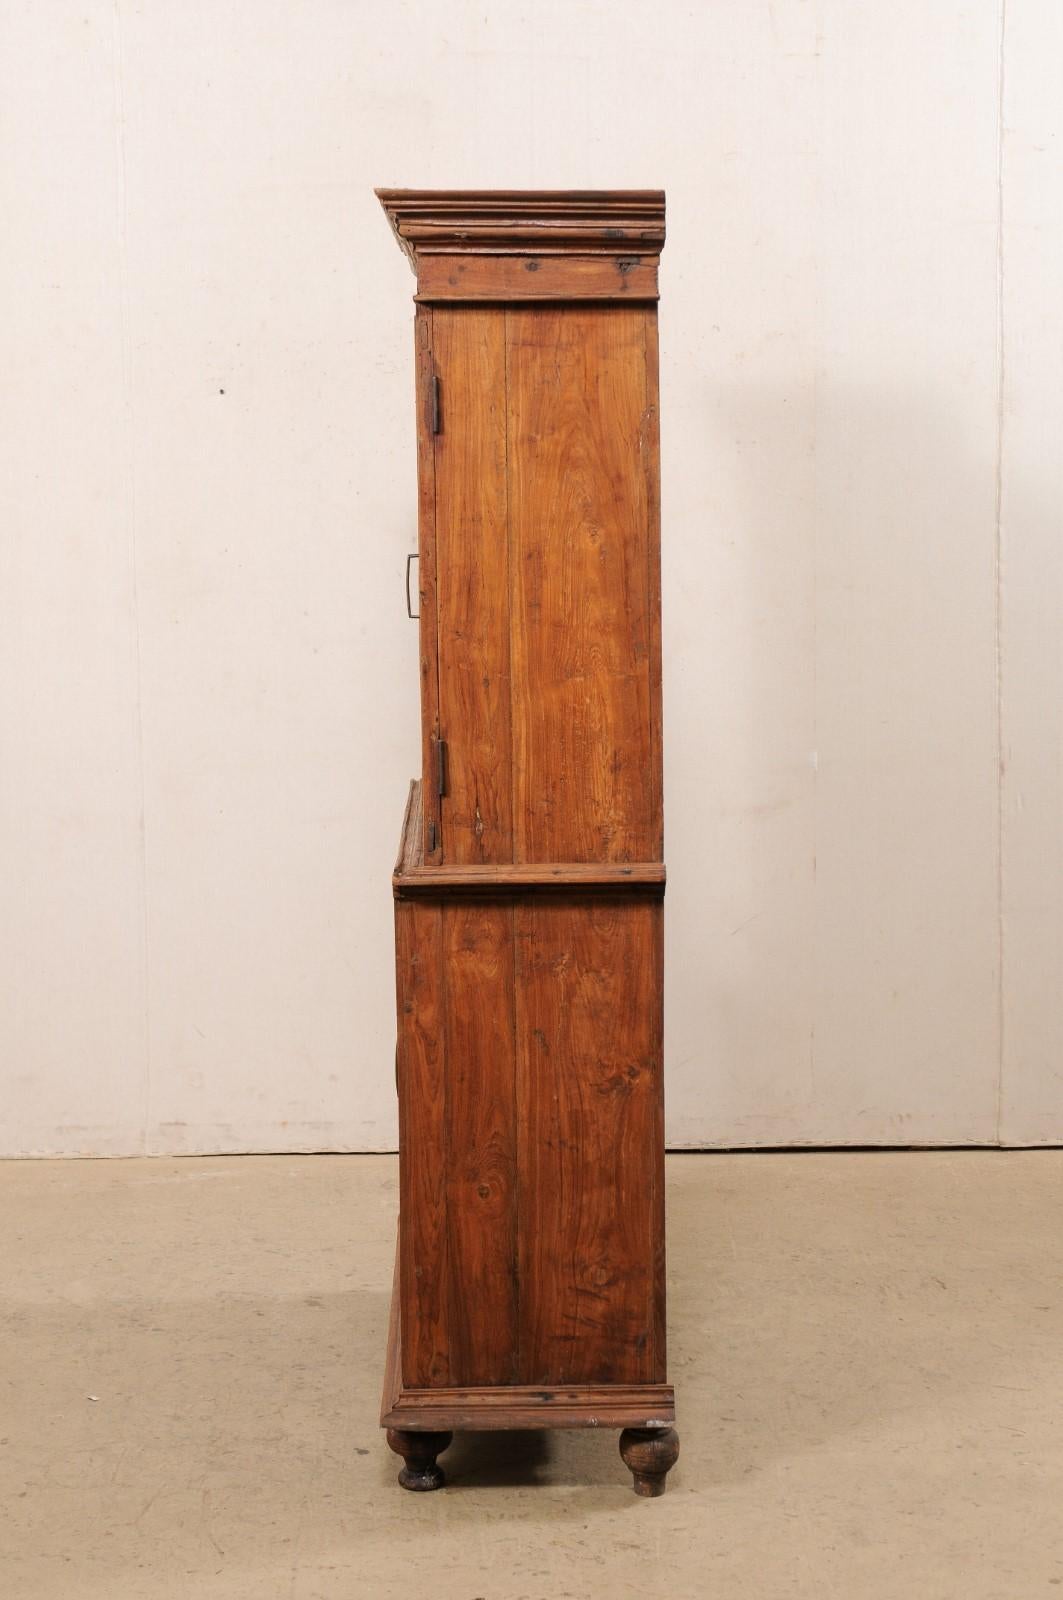 Tall British Colonial Teak-Carved Cabinet W/ Beautifully Carved Doors, 19th C 2